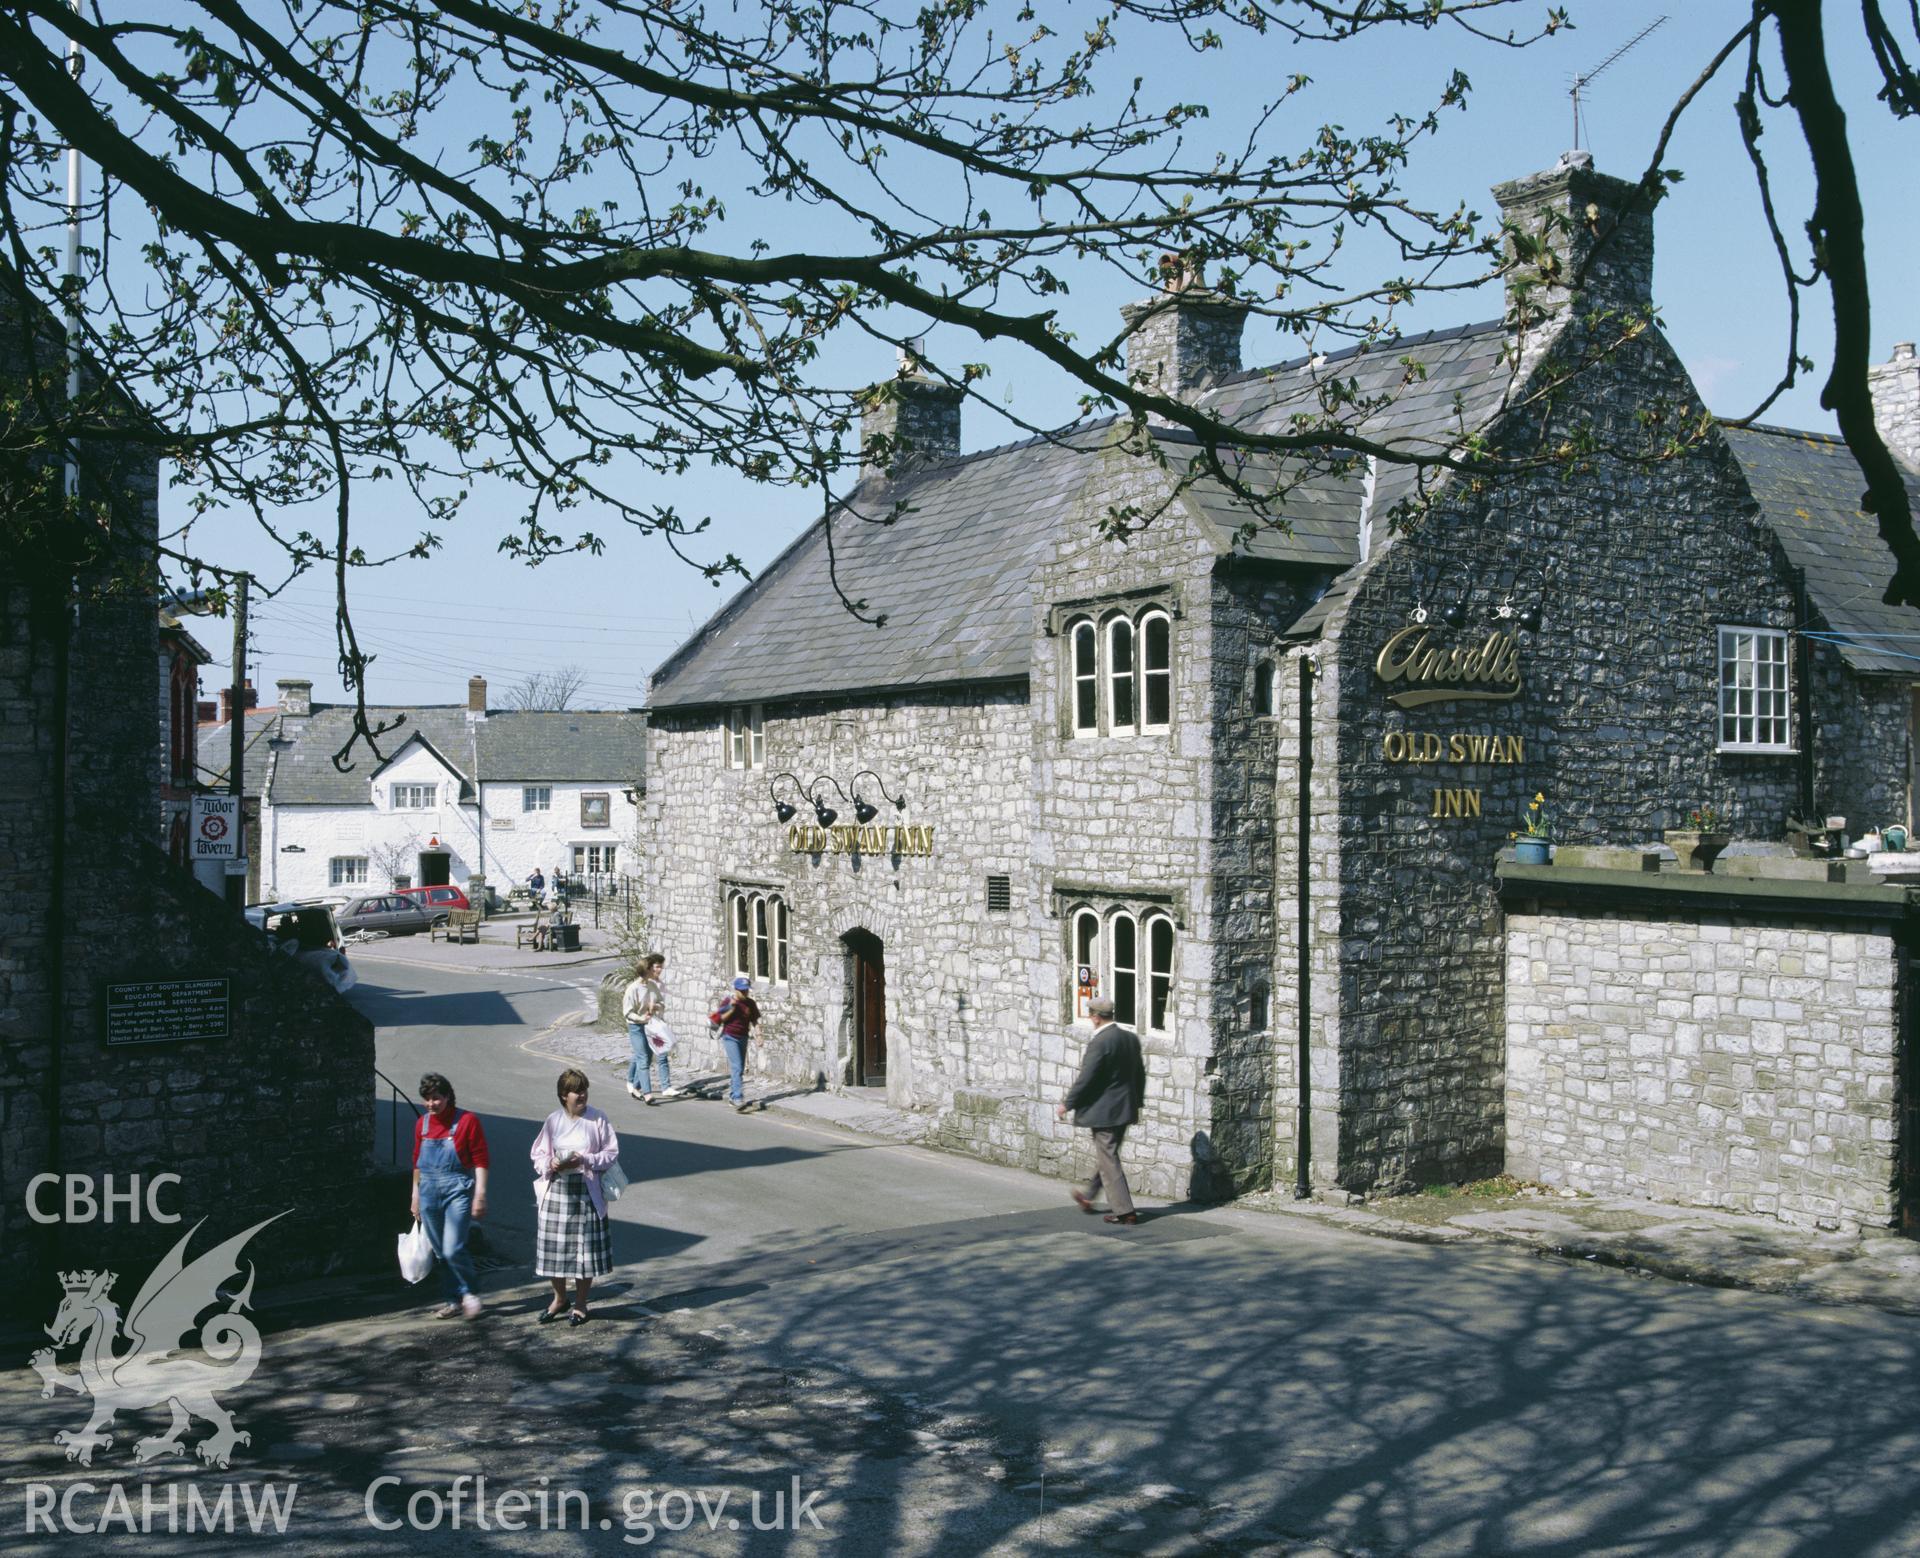 RCAHMW colour transparency showing the Old Swan Inn, Llantwit Major, taken by Iain Wright, c.1980